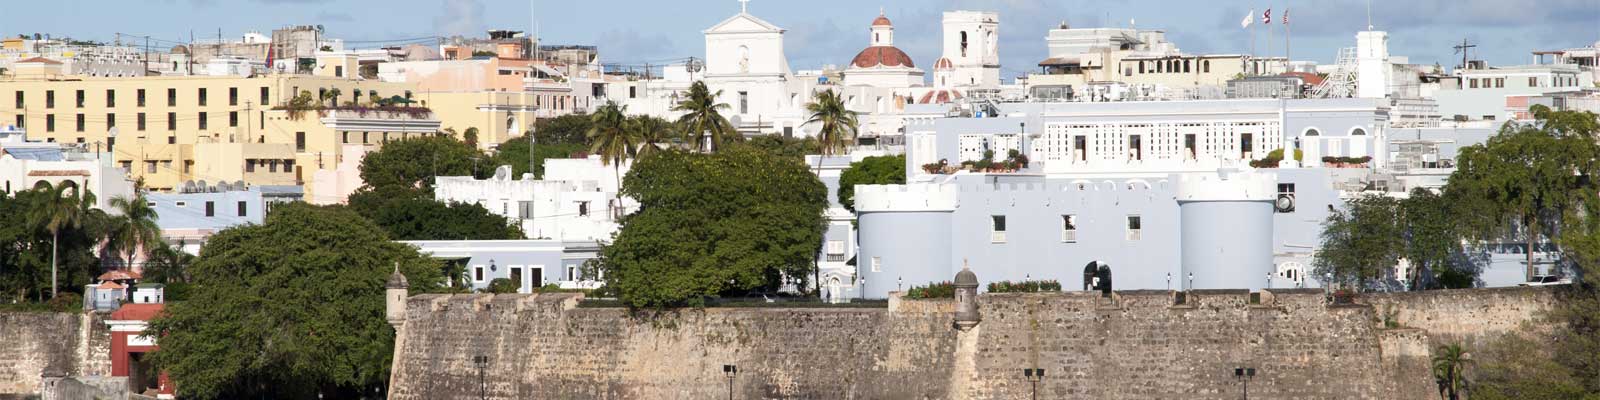 Pictured: A cityscape of downtown Puerto Rico.